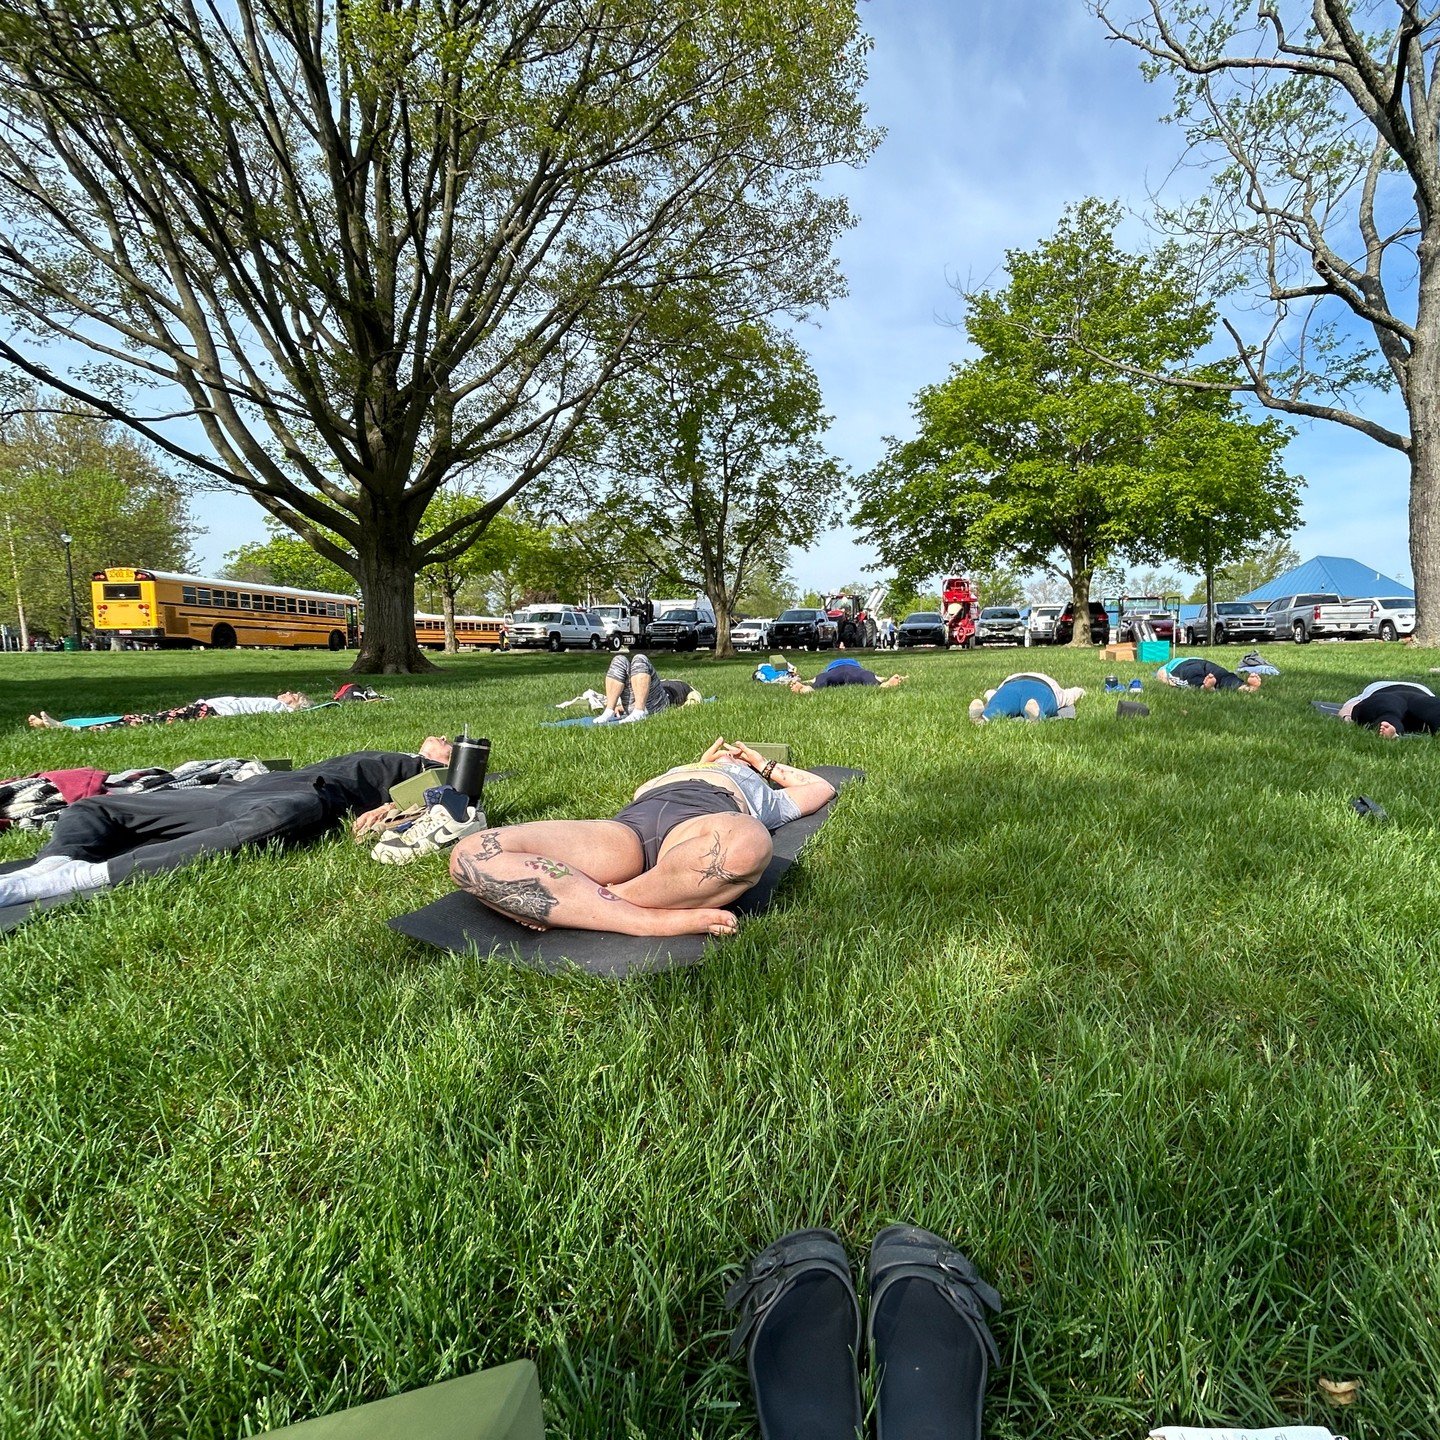 Today was the first official Yoga in the Park class! 🌳

We soaked up the sunshine, felt the breeze, moved our bodies, and let's just say the parking lot provided some unexpected &quot;present moment awareness&quot; challenges. 😂

But hey, isn't tha